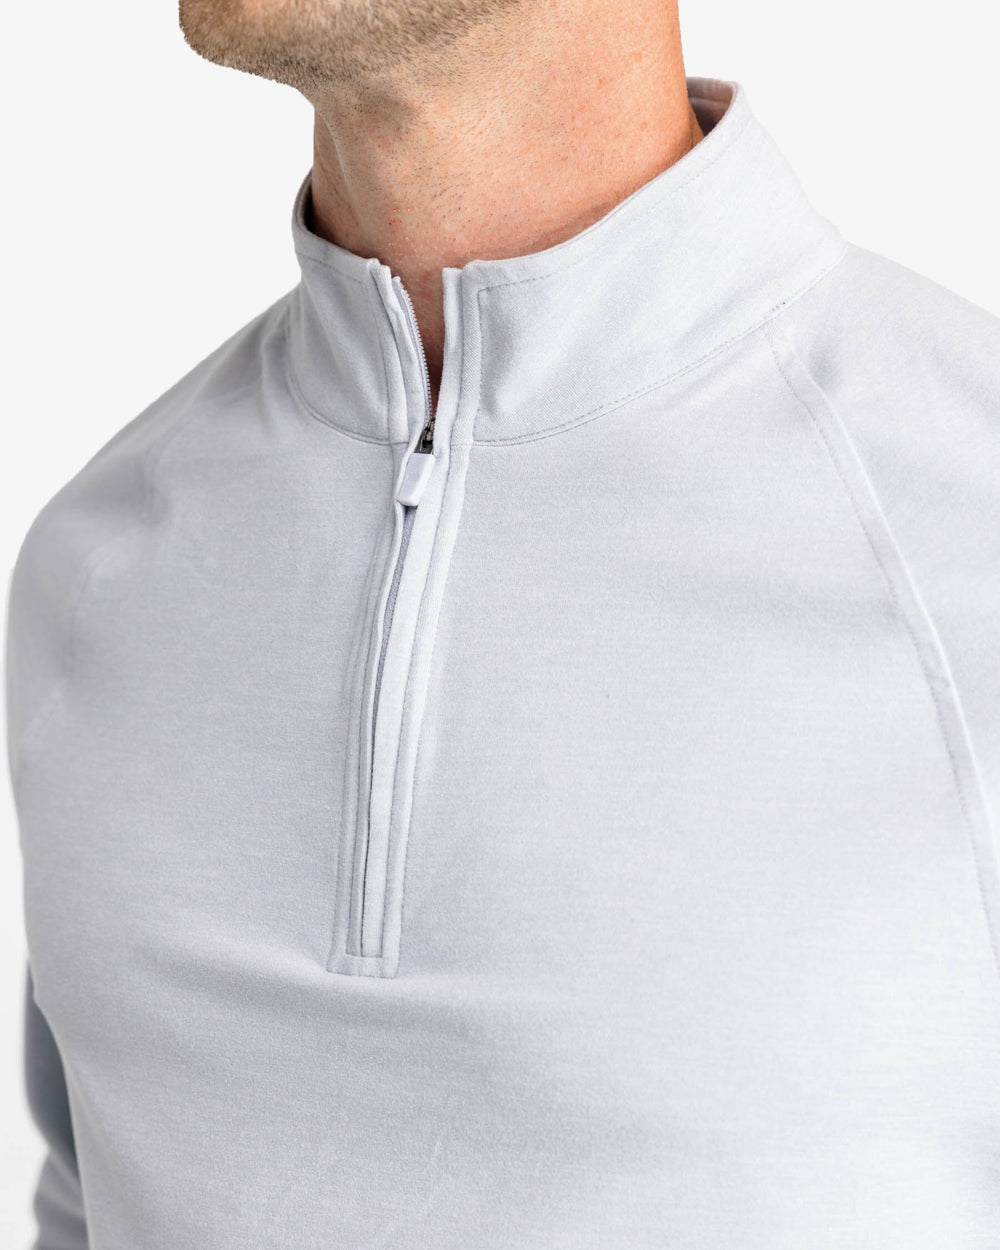 The detail view of the Southern Tide Cruiser Heather Quarter Zip by Southern Tide - Heather Slate Grey